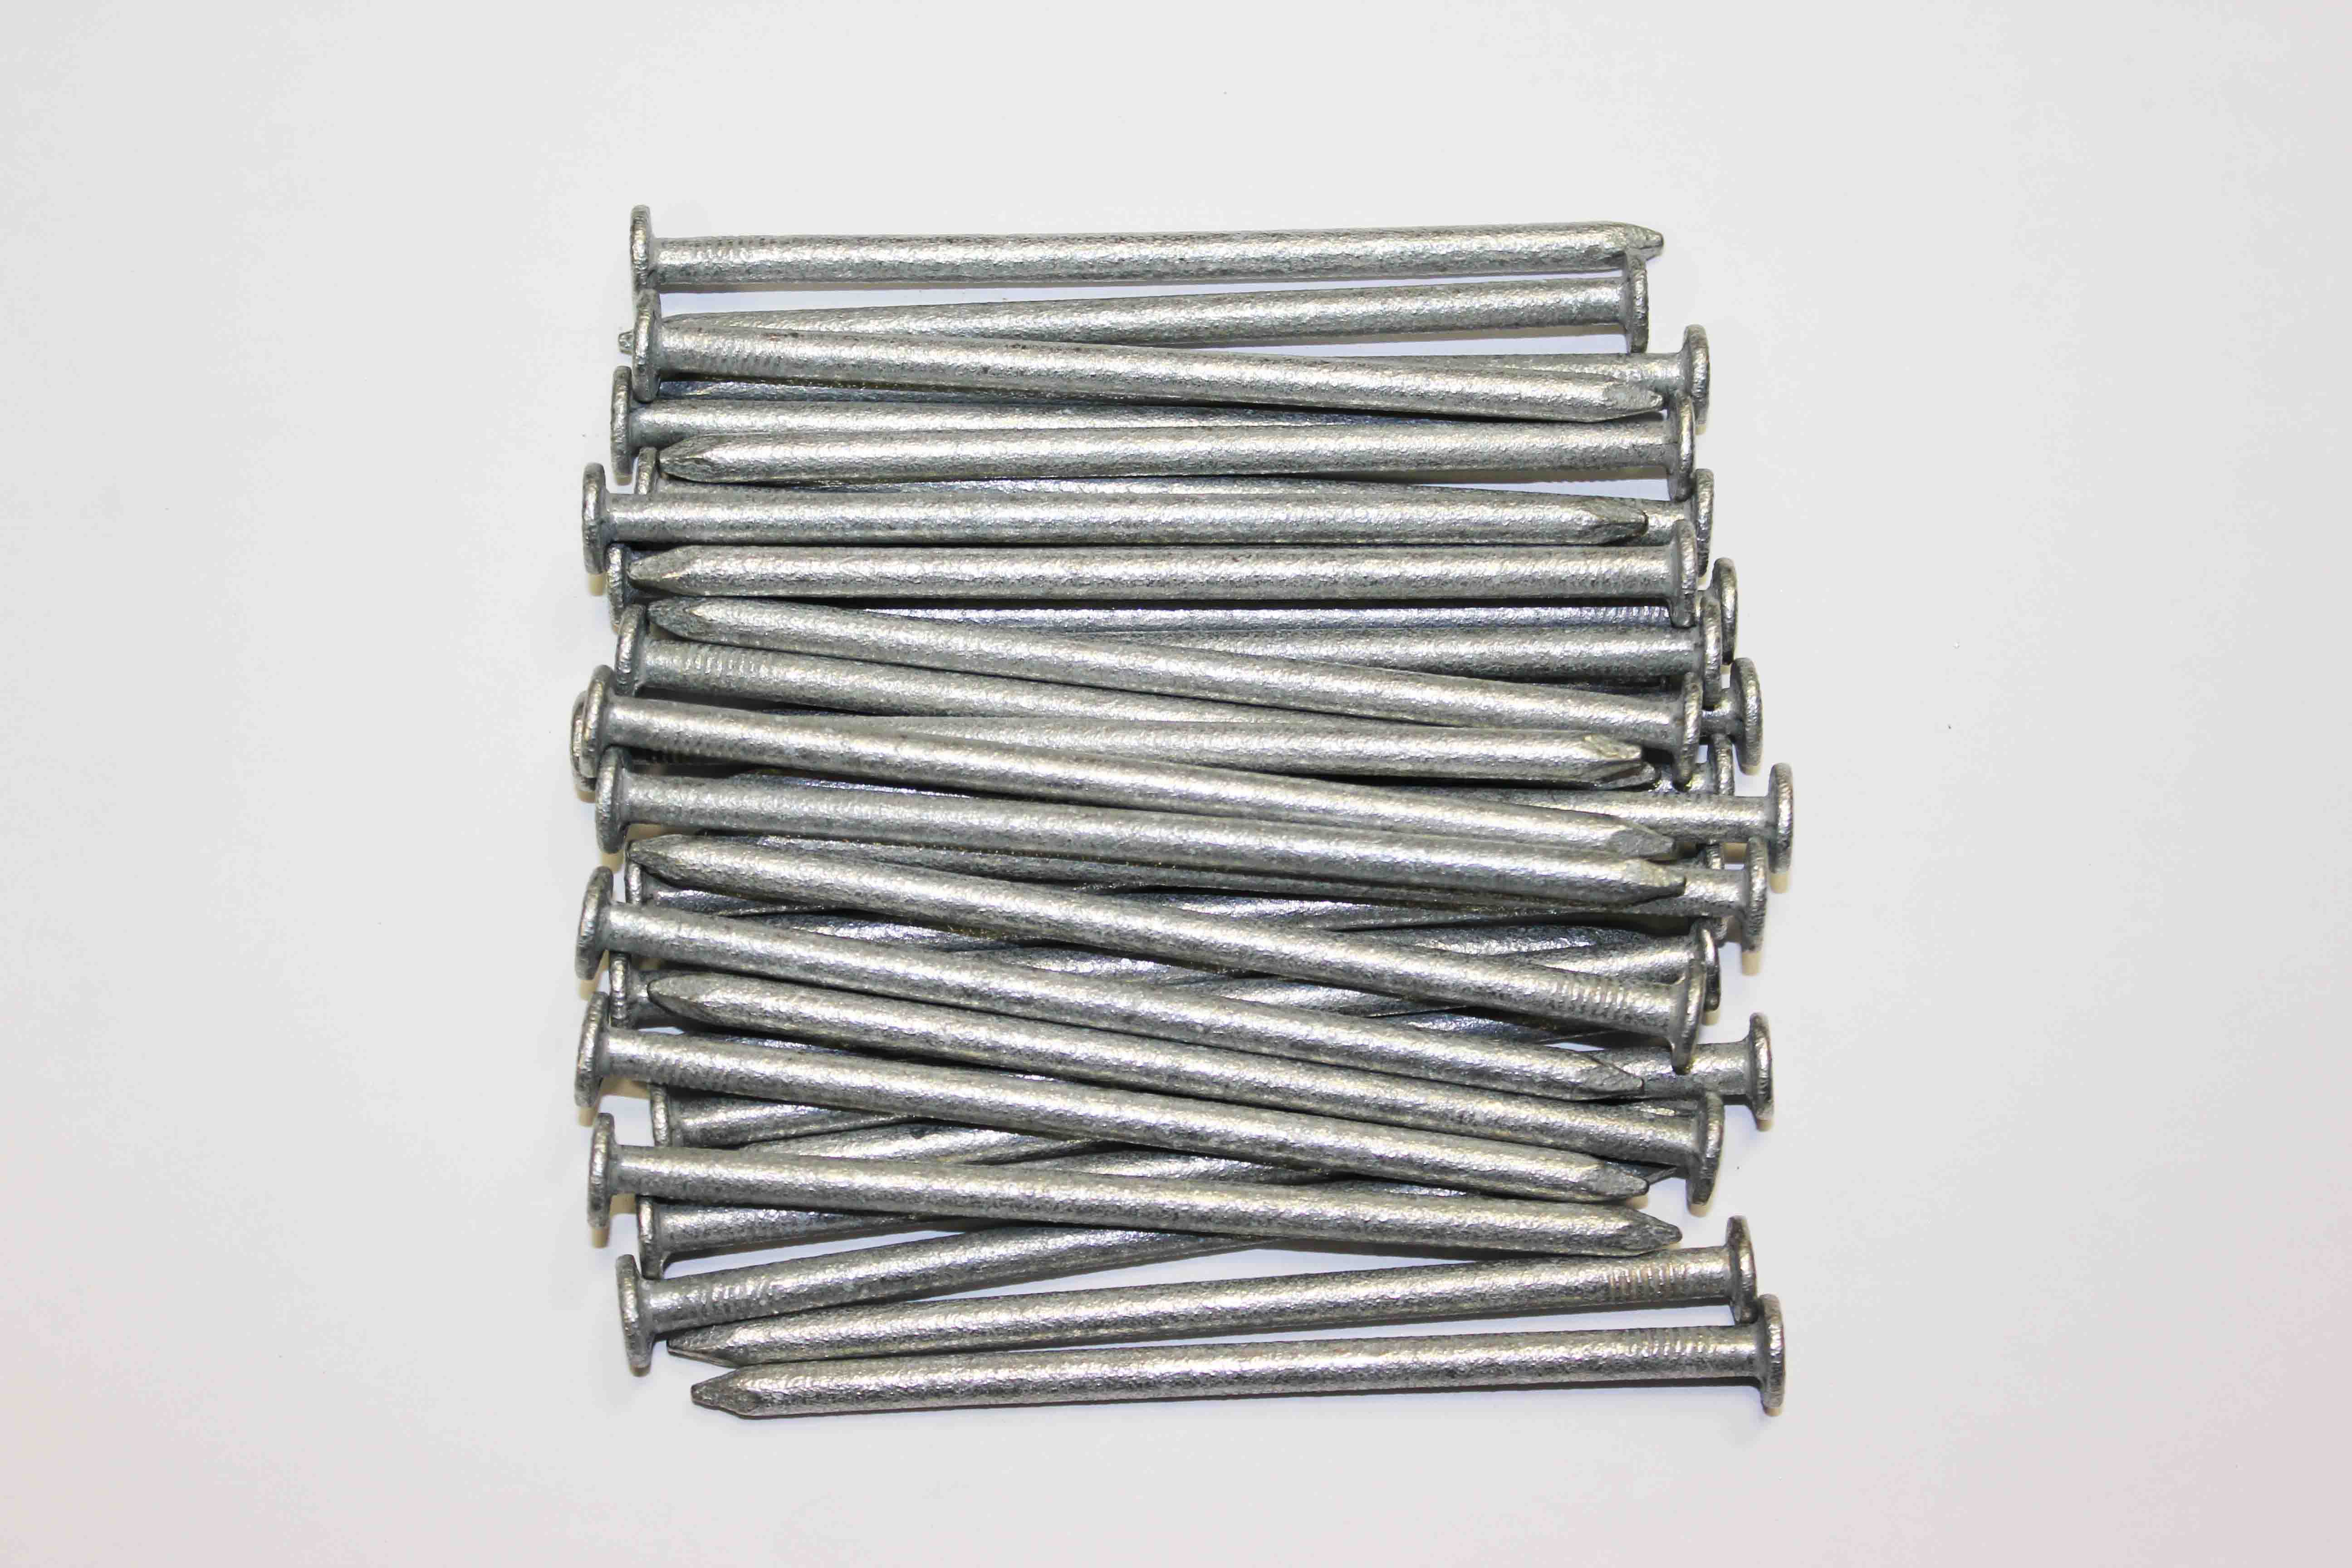 5kg GALVANISED ROUND WIRE NAILS PICK YOUR SIZE 5000g TRADE-FIXINGS DIRECT 